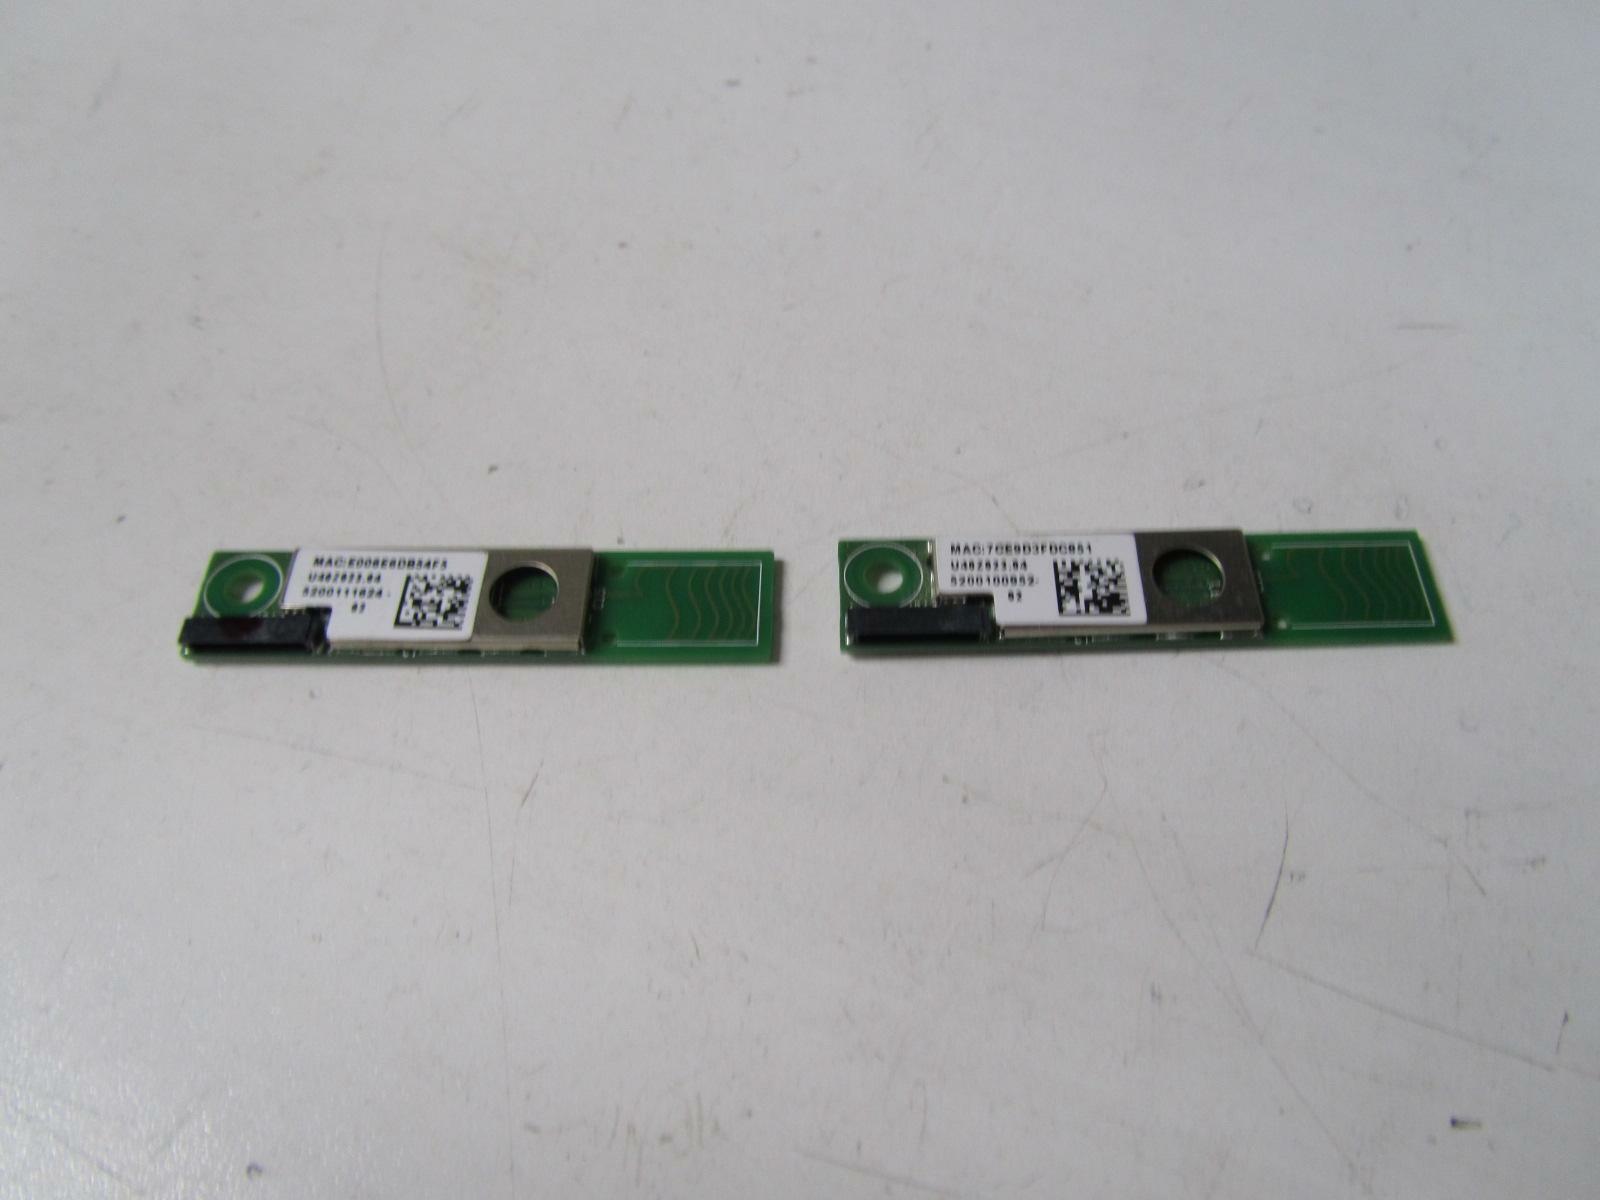 Pair of OEM Bluetooth 4.0 Module for Dell Latitude E6410 - 0G9M5X